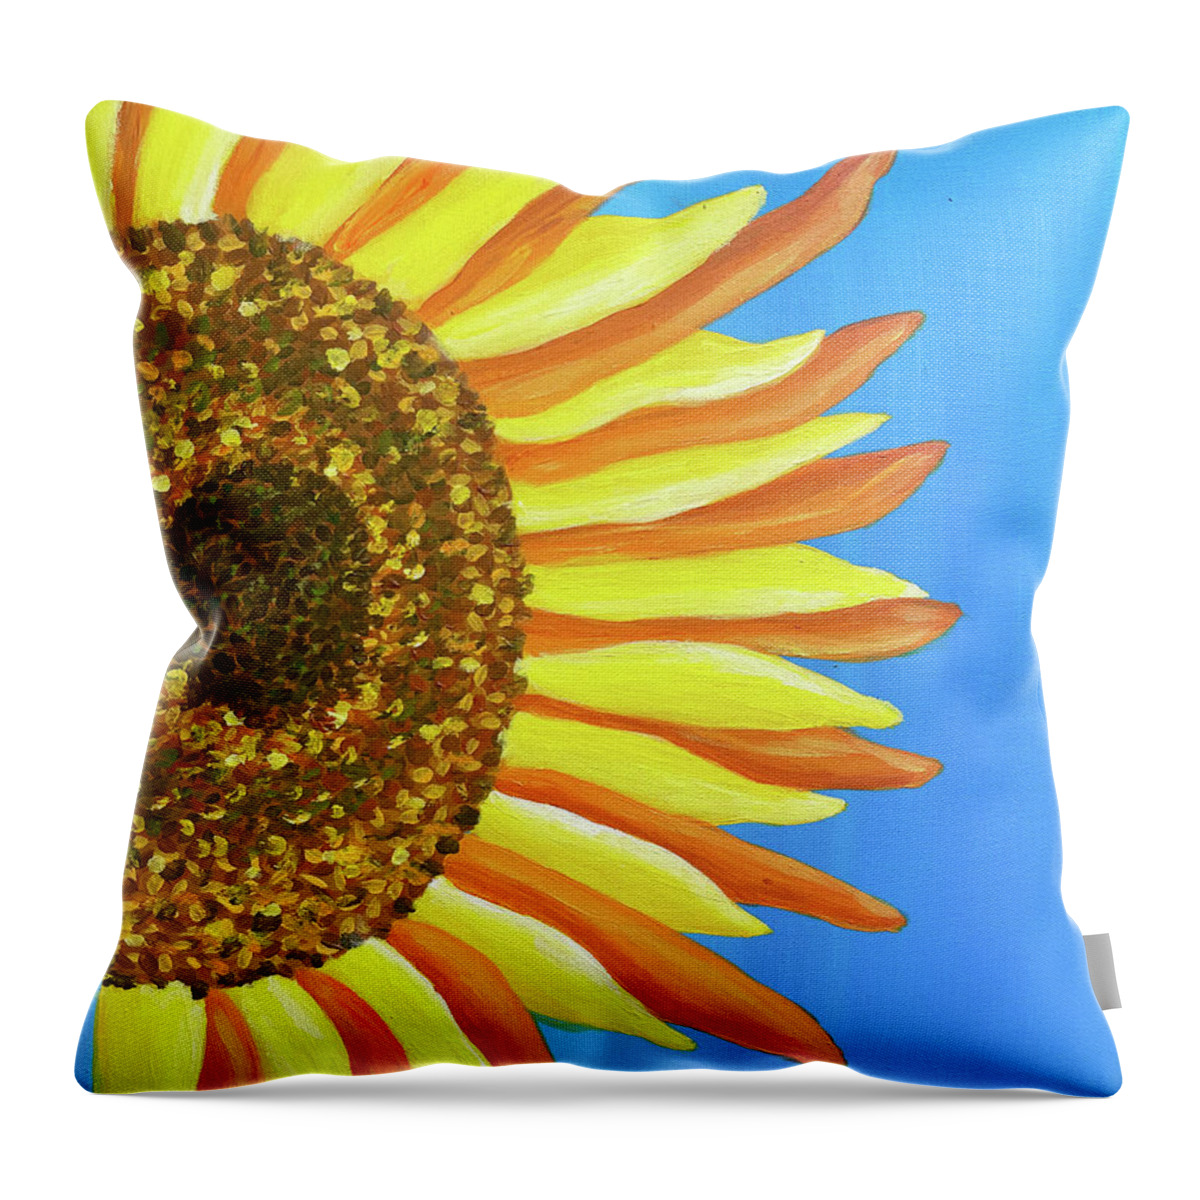 Sunflower Throw Pillow featuring the painting Sunflower One by Christina Wedberg